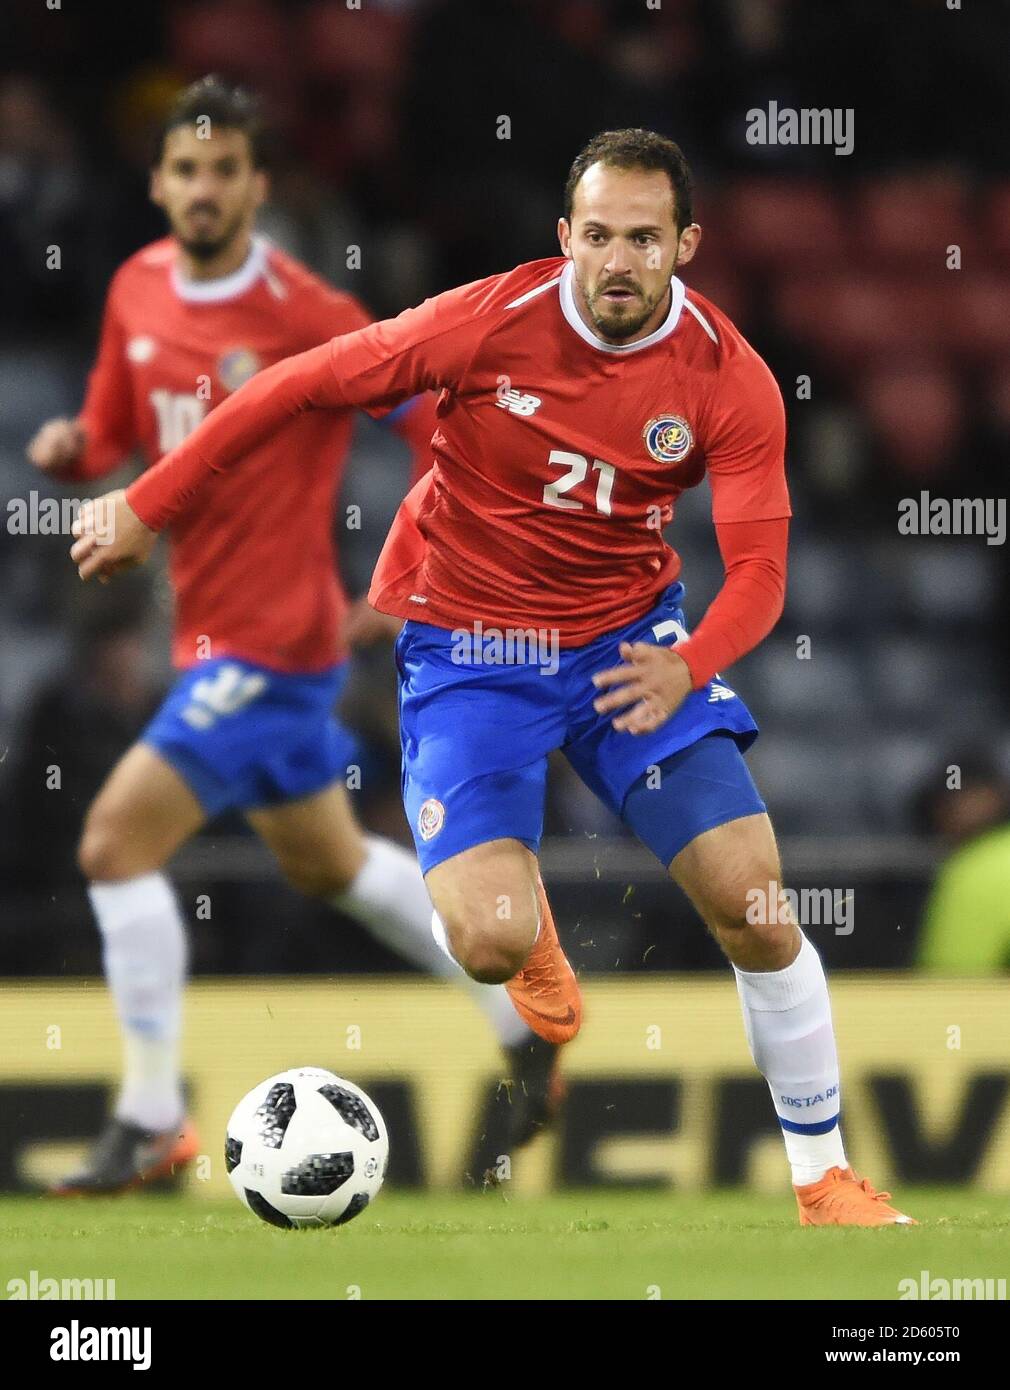 Costa Rica's Maecos Urena in action during the international friendly match at Hampden Park, Glasgow. RESTRICTIONS: Use subject to restrictions. Editorial use only. Commercial use only with prior written consent of the Scottish FA. Stock Photo